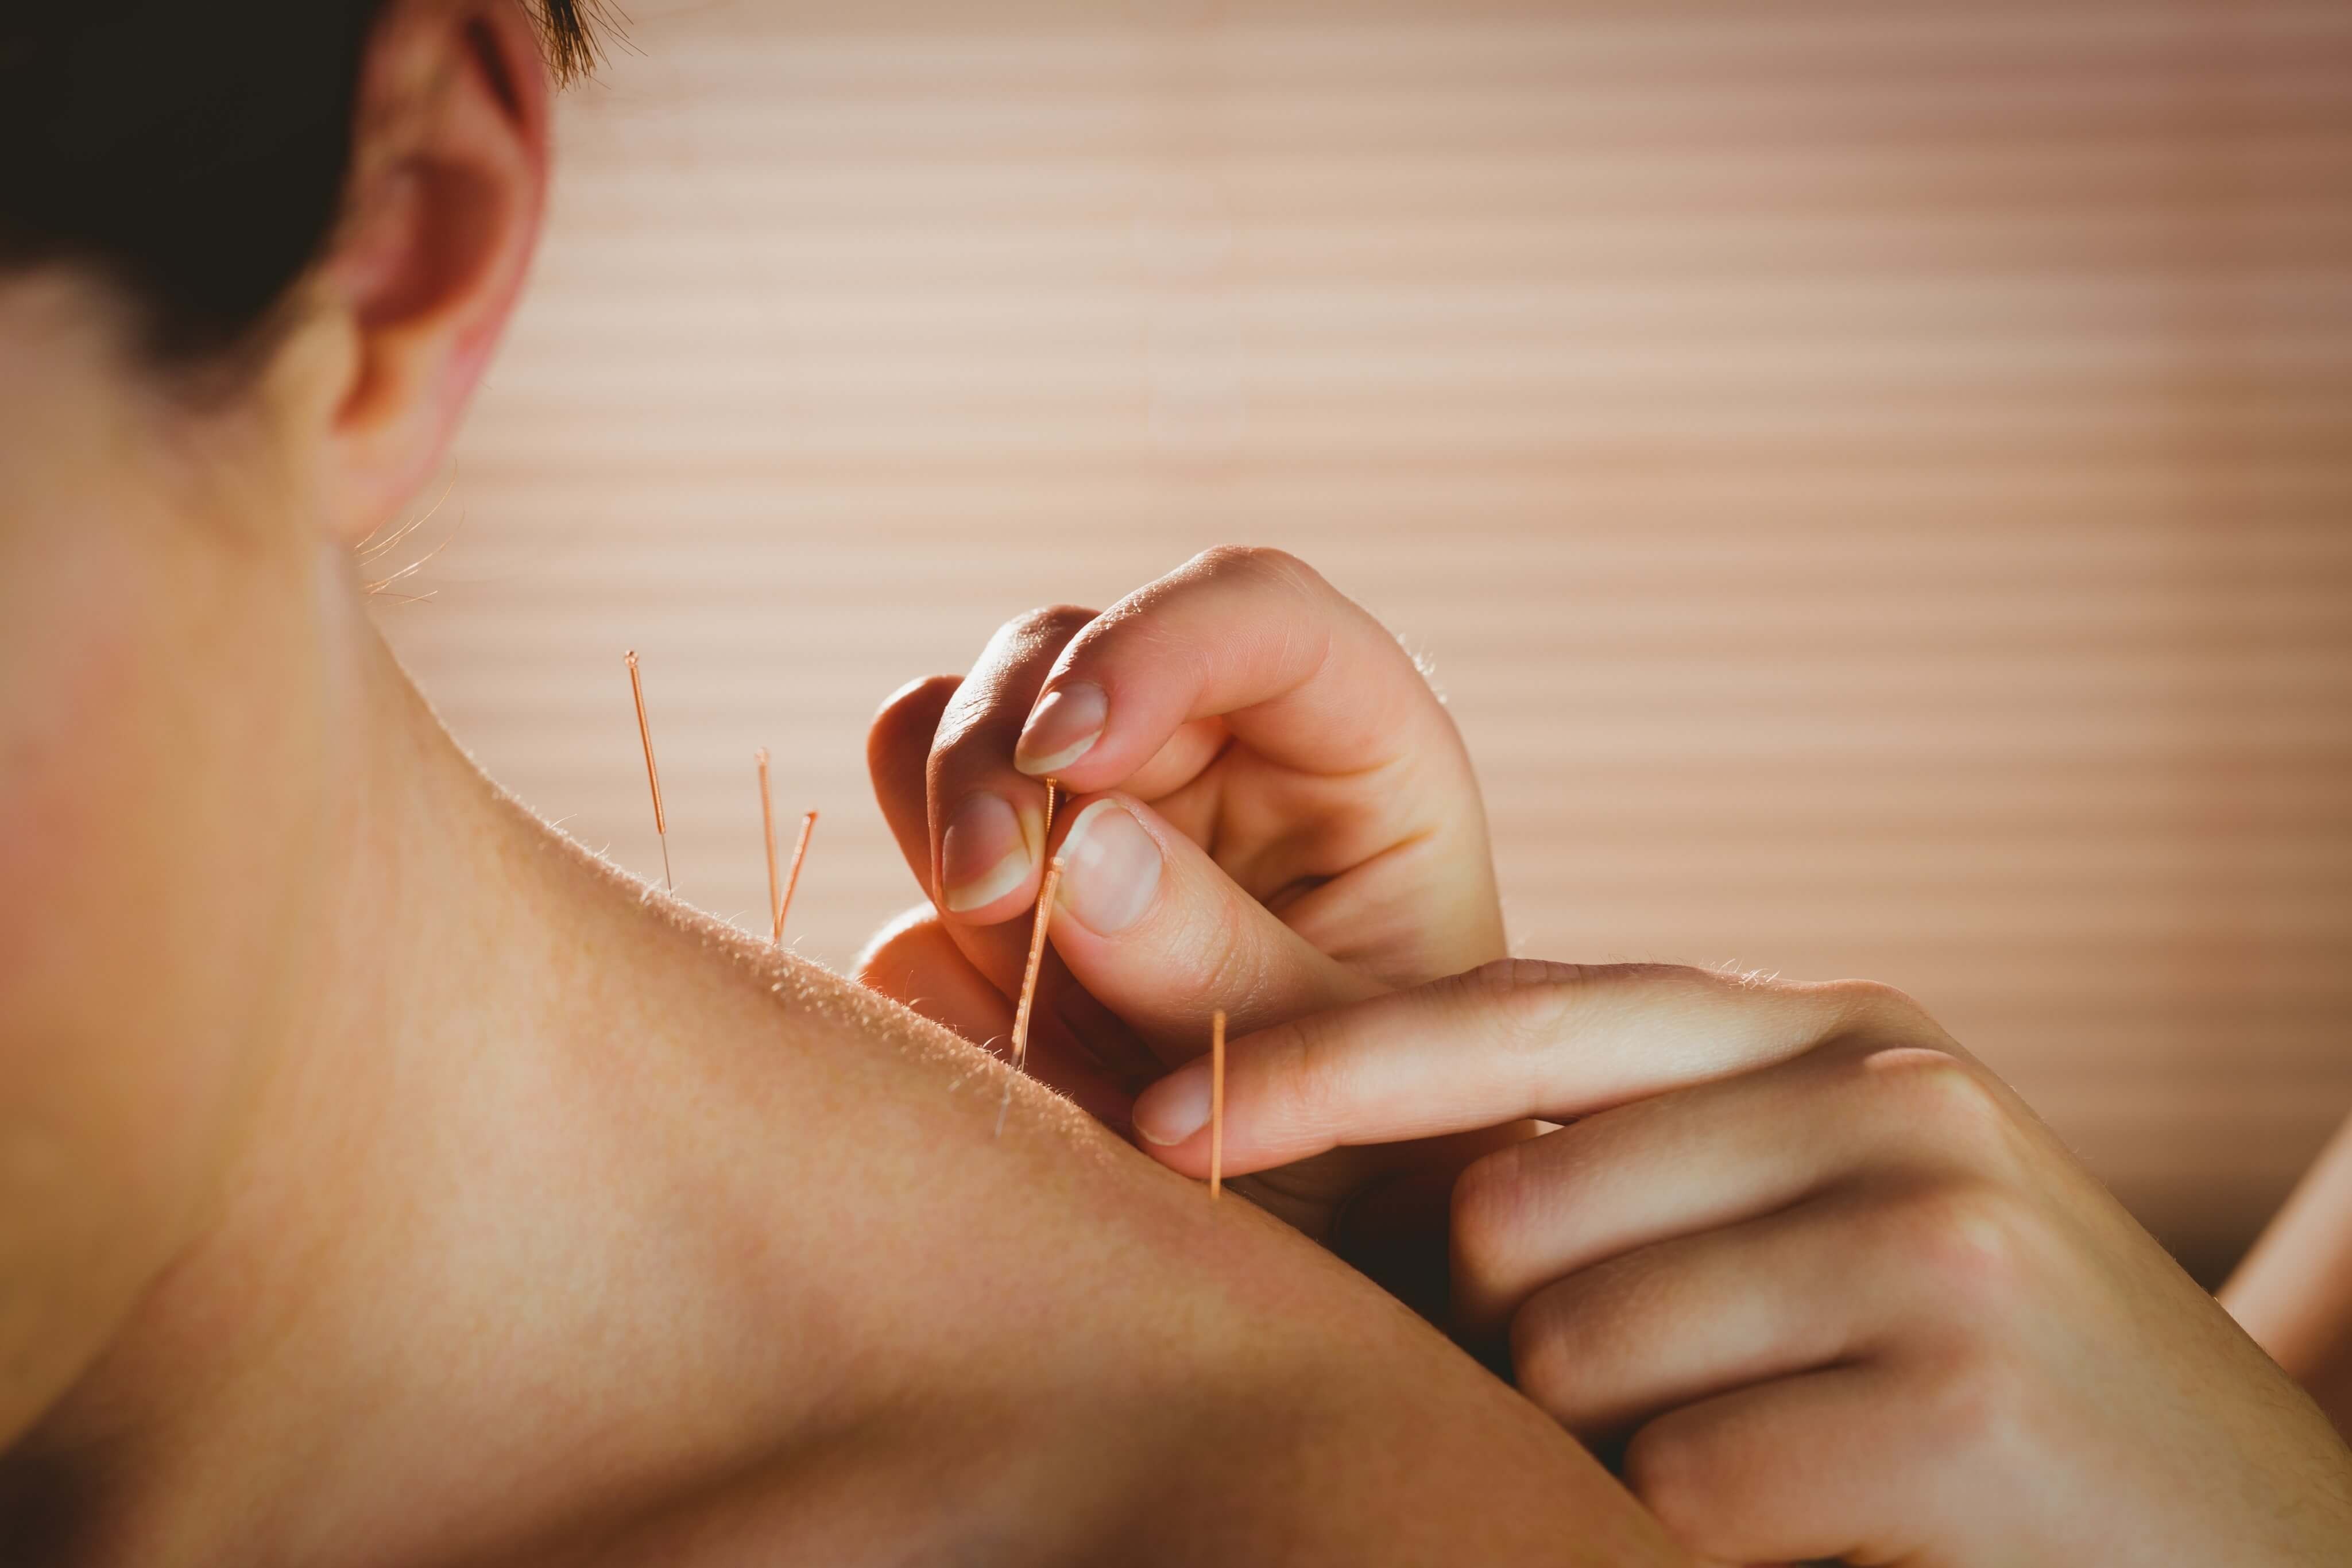 acupuncture treatment for pain relief